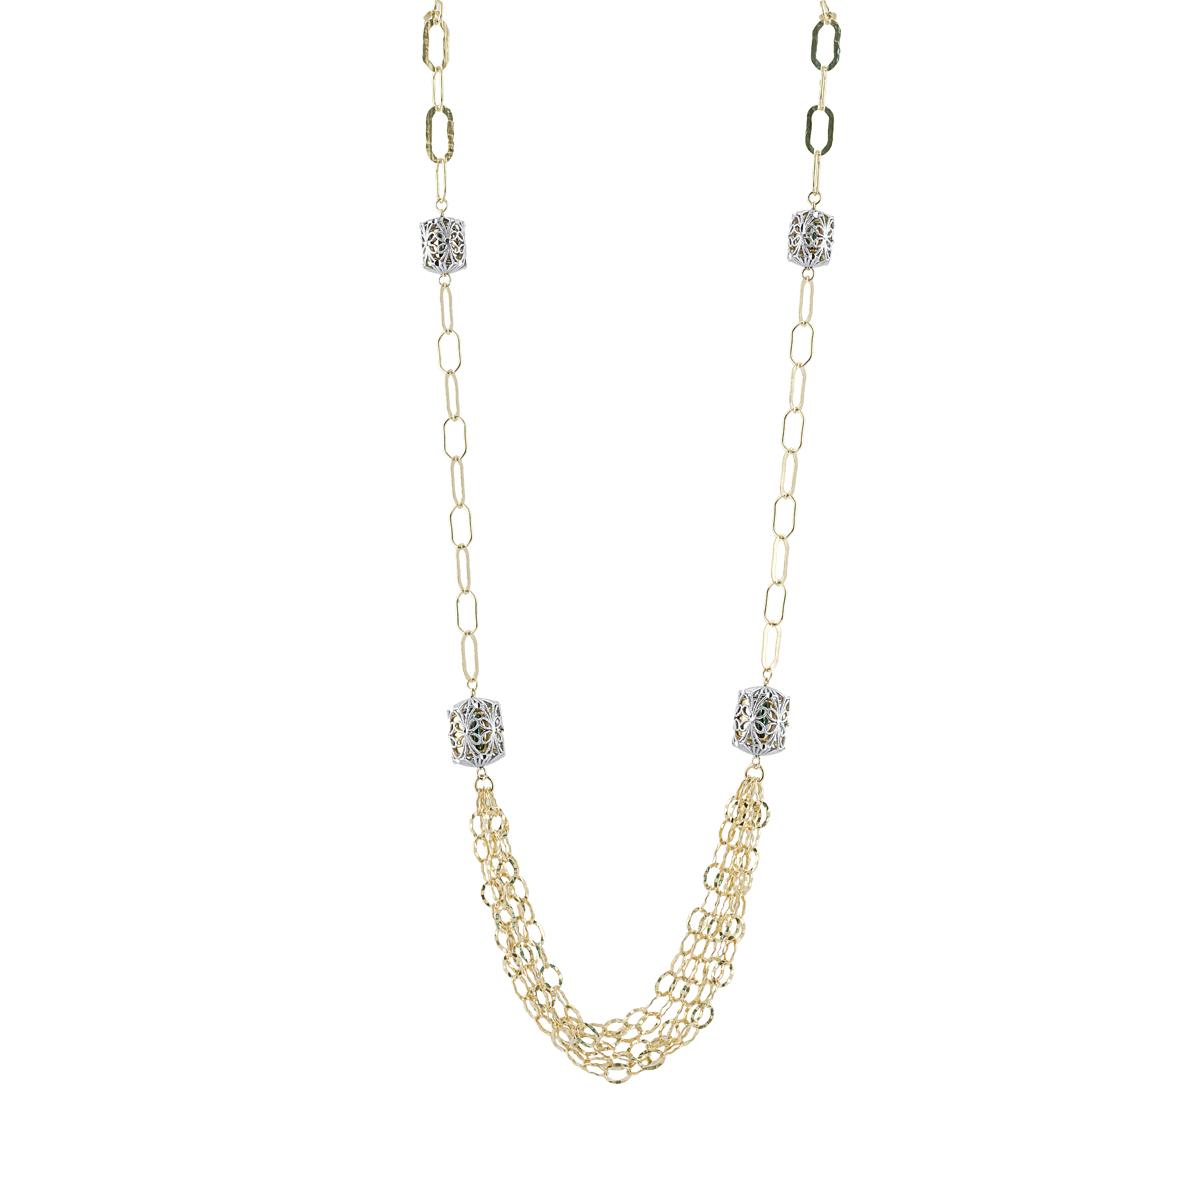 Chanel necklace in 925 rhodium-plated and gilded silver - ZCL1040-LN